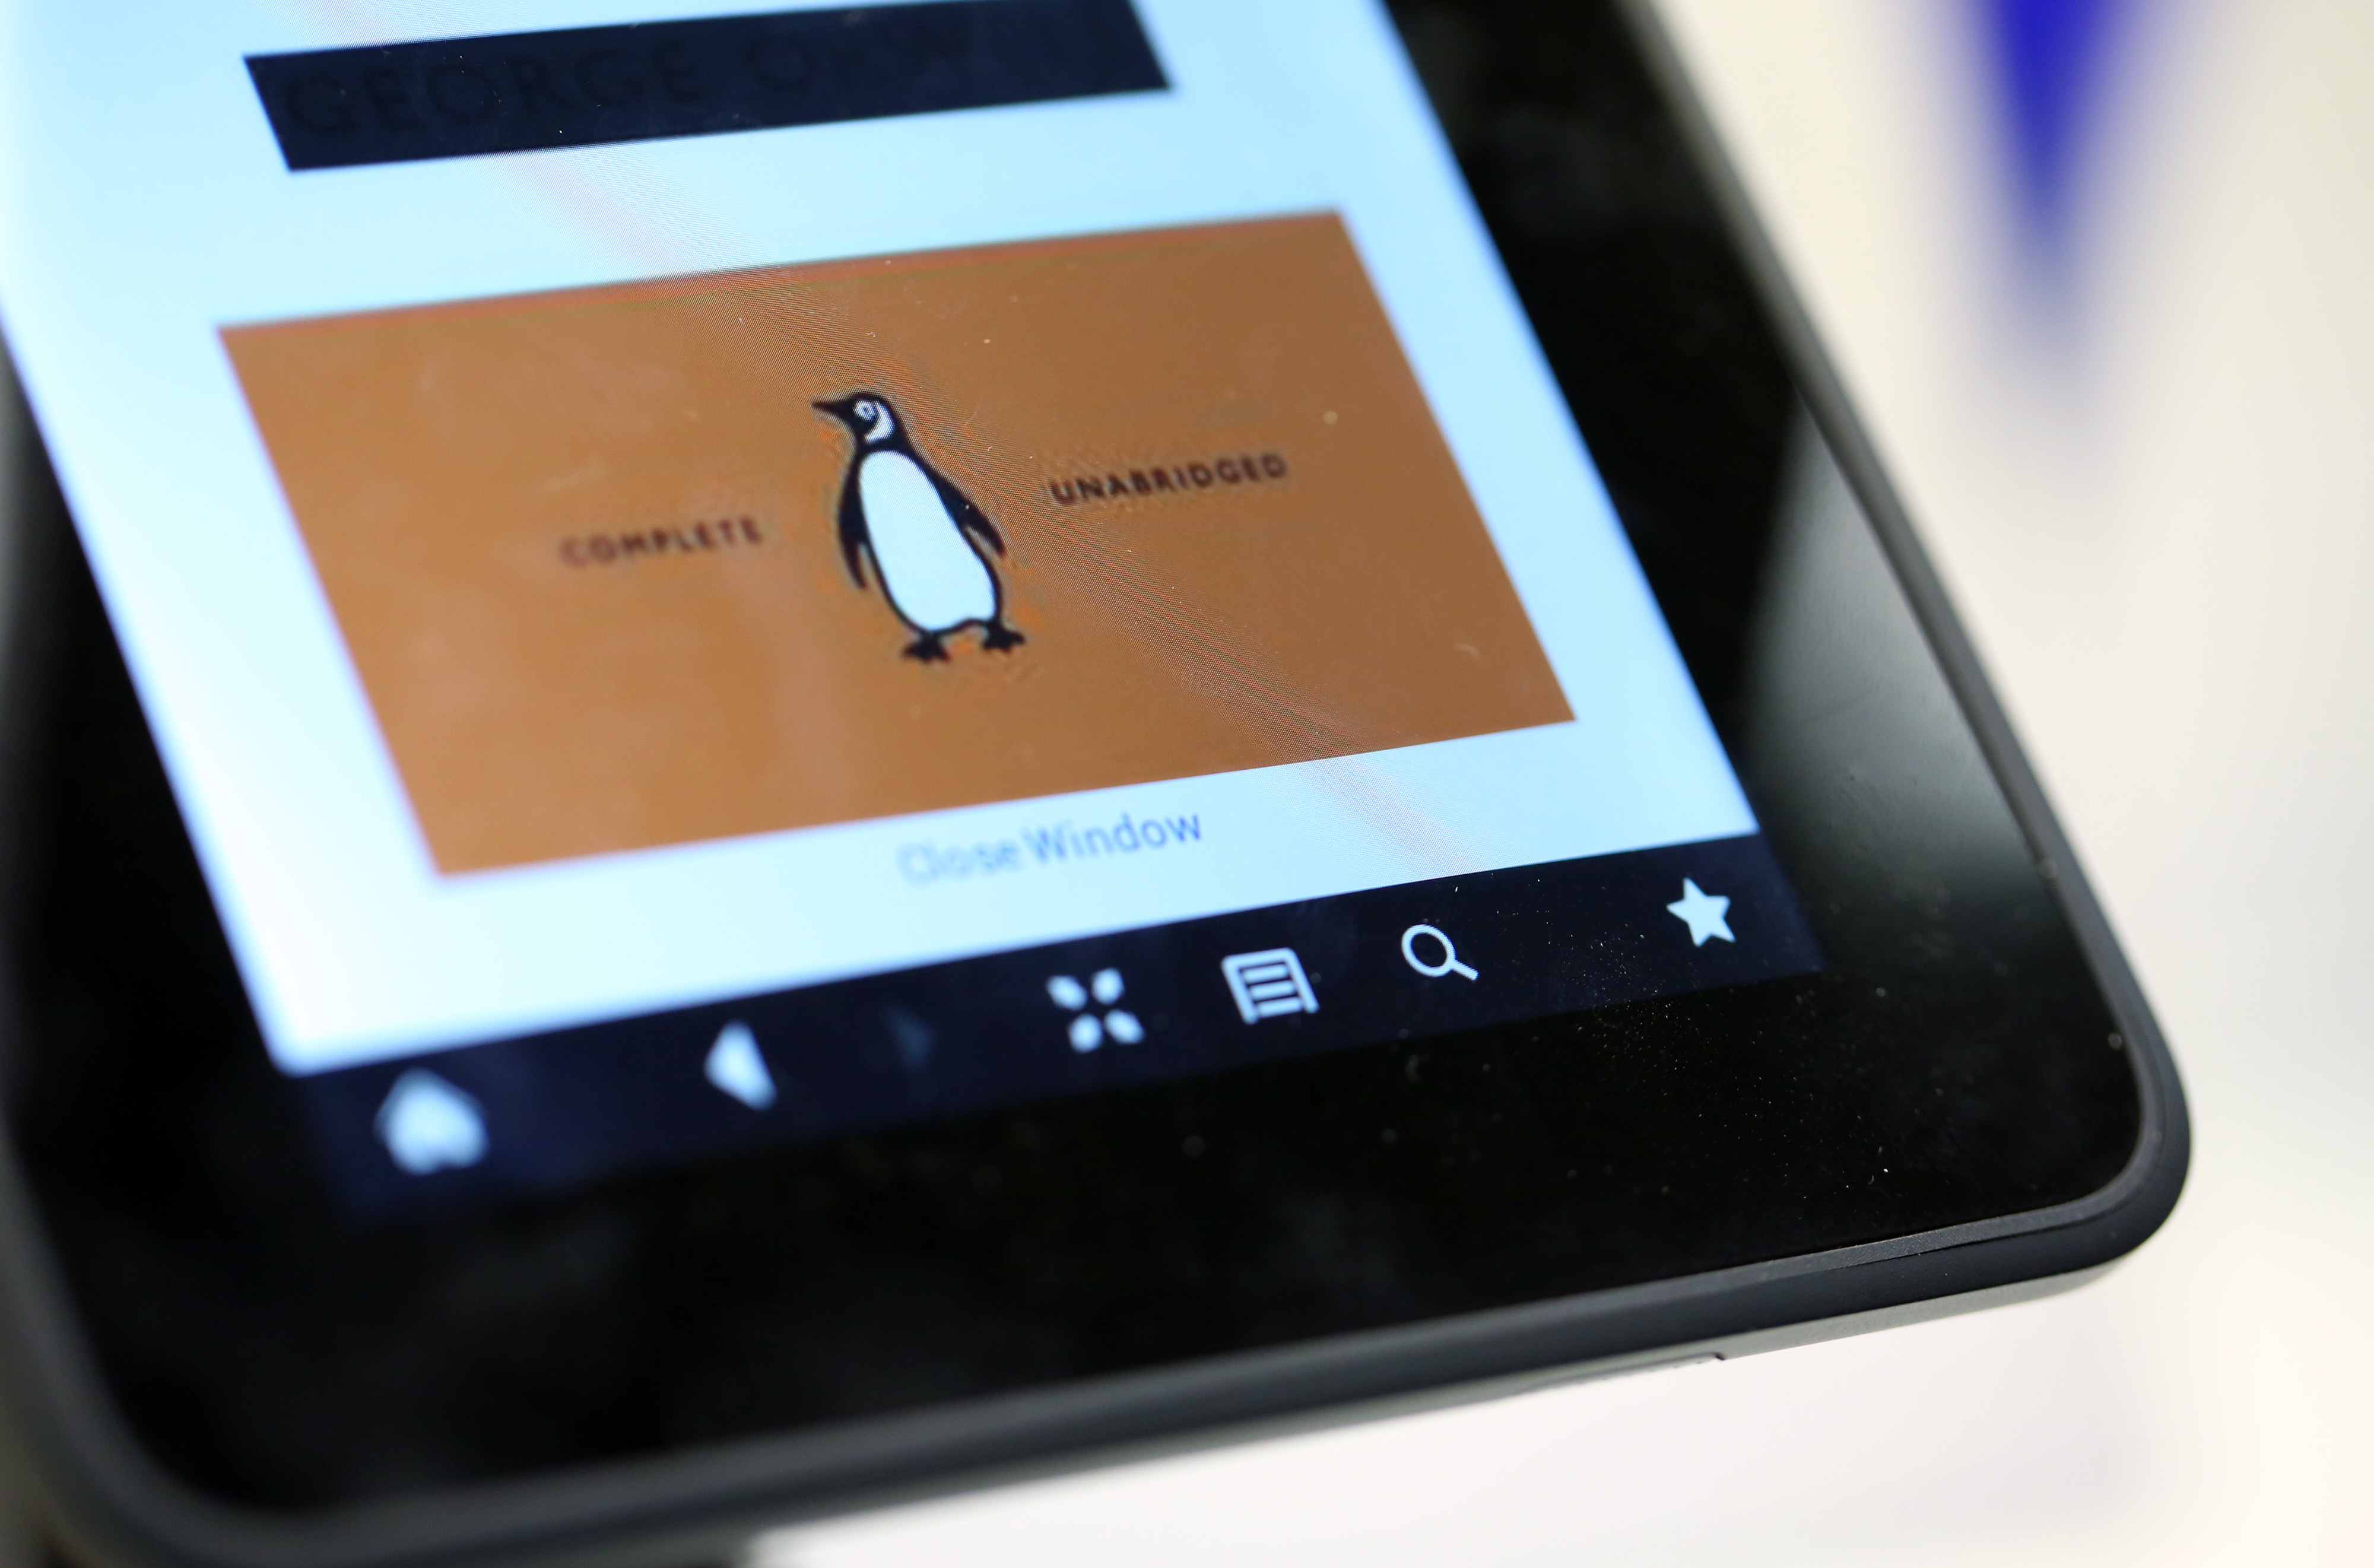 The logo of the Penguin publishing house, part of Pearson Plc, is seen on a Kindle Fire HD e-reader at a bookstore in London, U.K., on Friday, April 5, 2013. (Bloomberg/Getty Images)